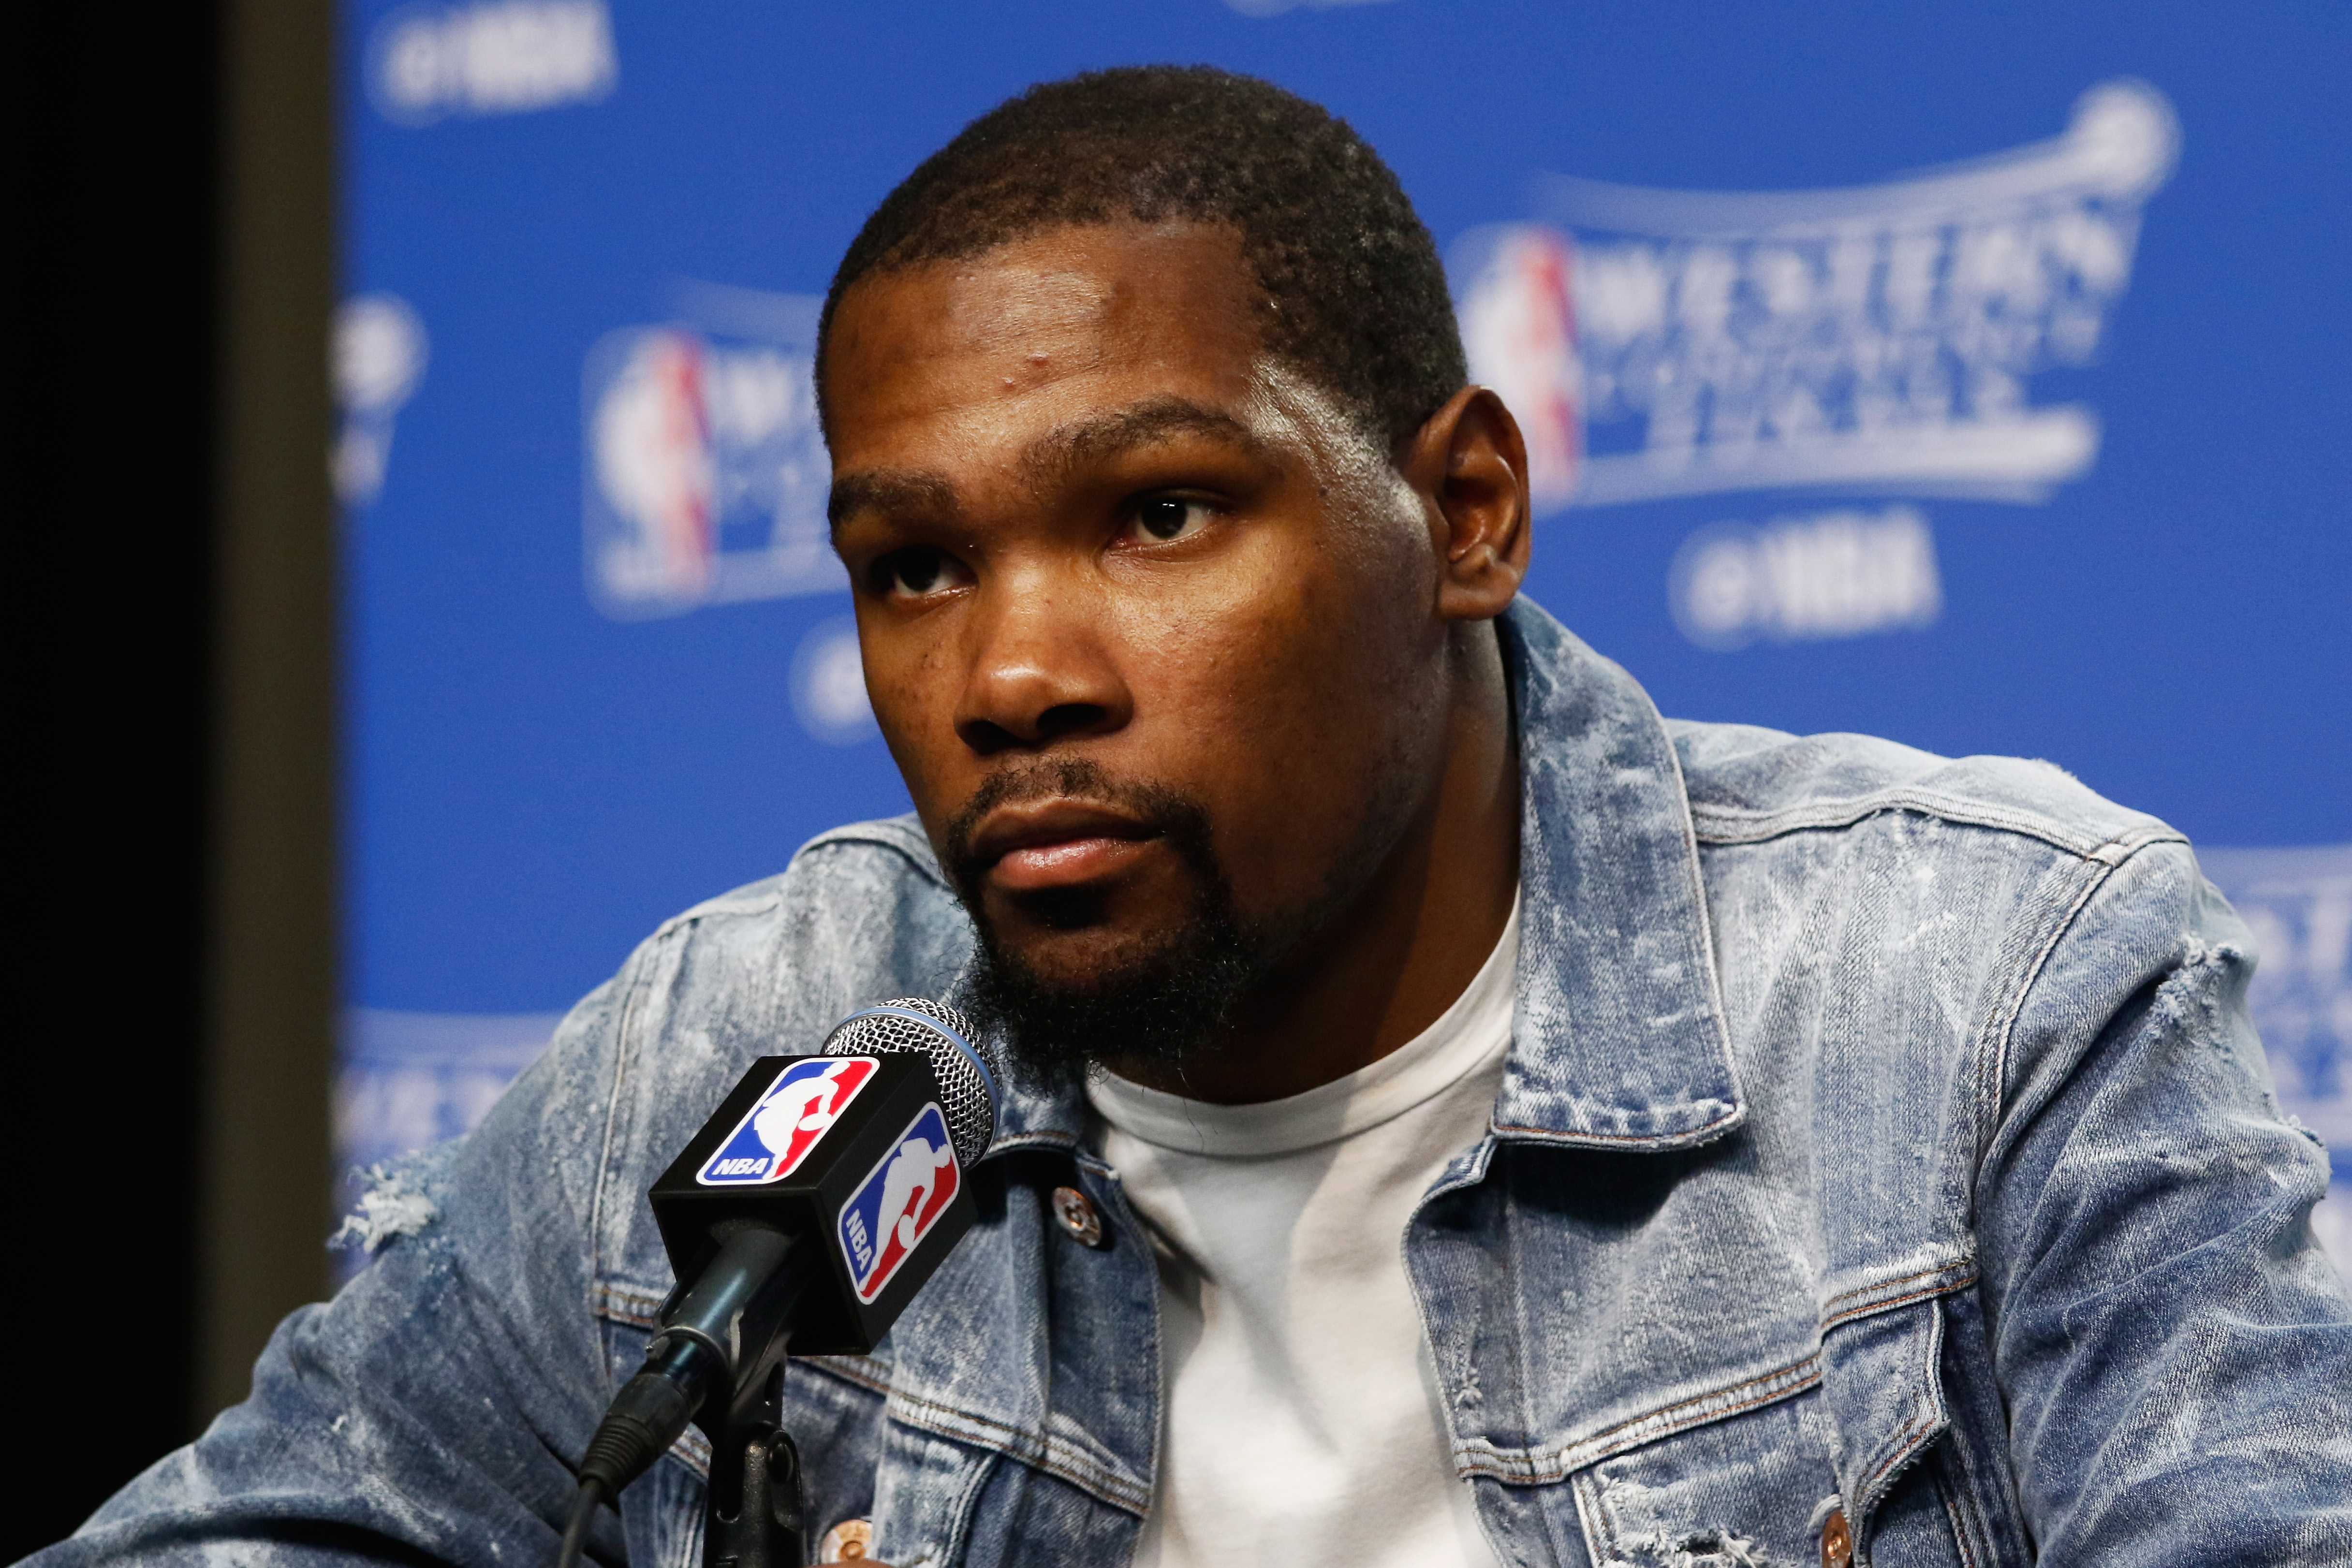 OKLAHOMA CITY, OK - MAY 28: Kevin Durant #35 of the Oklahoma City Thunder looks on during a press conference after the Golden State Warriors defeated the Oklahoma City Thunder 108-101 in game six of the Western Conference Finals during the 2016 NBA Playoffs at Chesapeake Energy Arena on May 28, 2016 in Oklahoma City, Oklahoma. NOTE TO USER: User expressly acknowledges and agrees that, by downloading and or using this photograph, User is consenting to the terms and conditions of the Getty Images License Agreement.   J Pat Carter/Getty Images/AFP